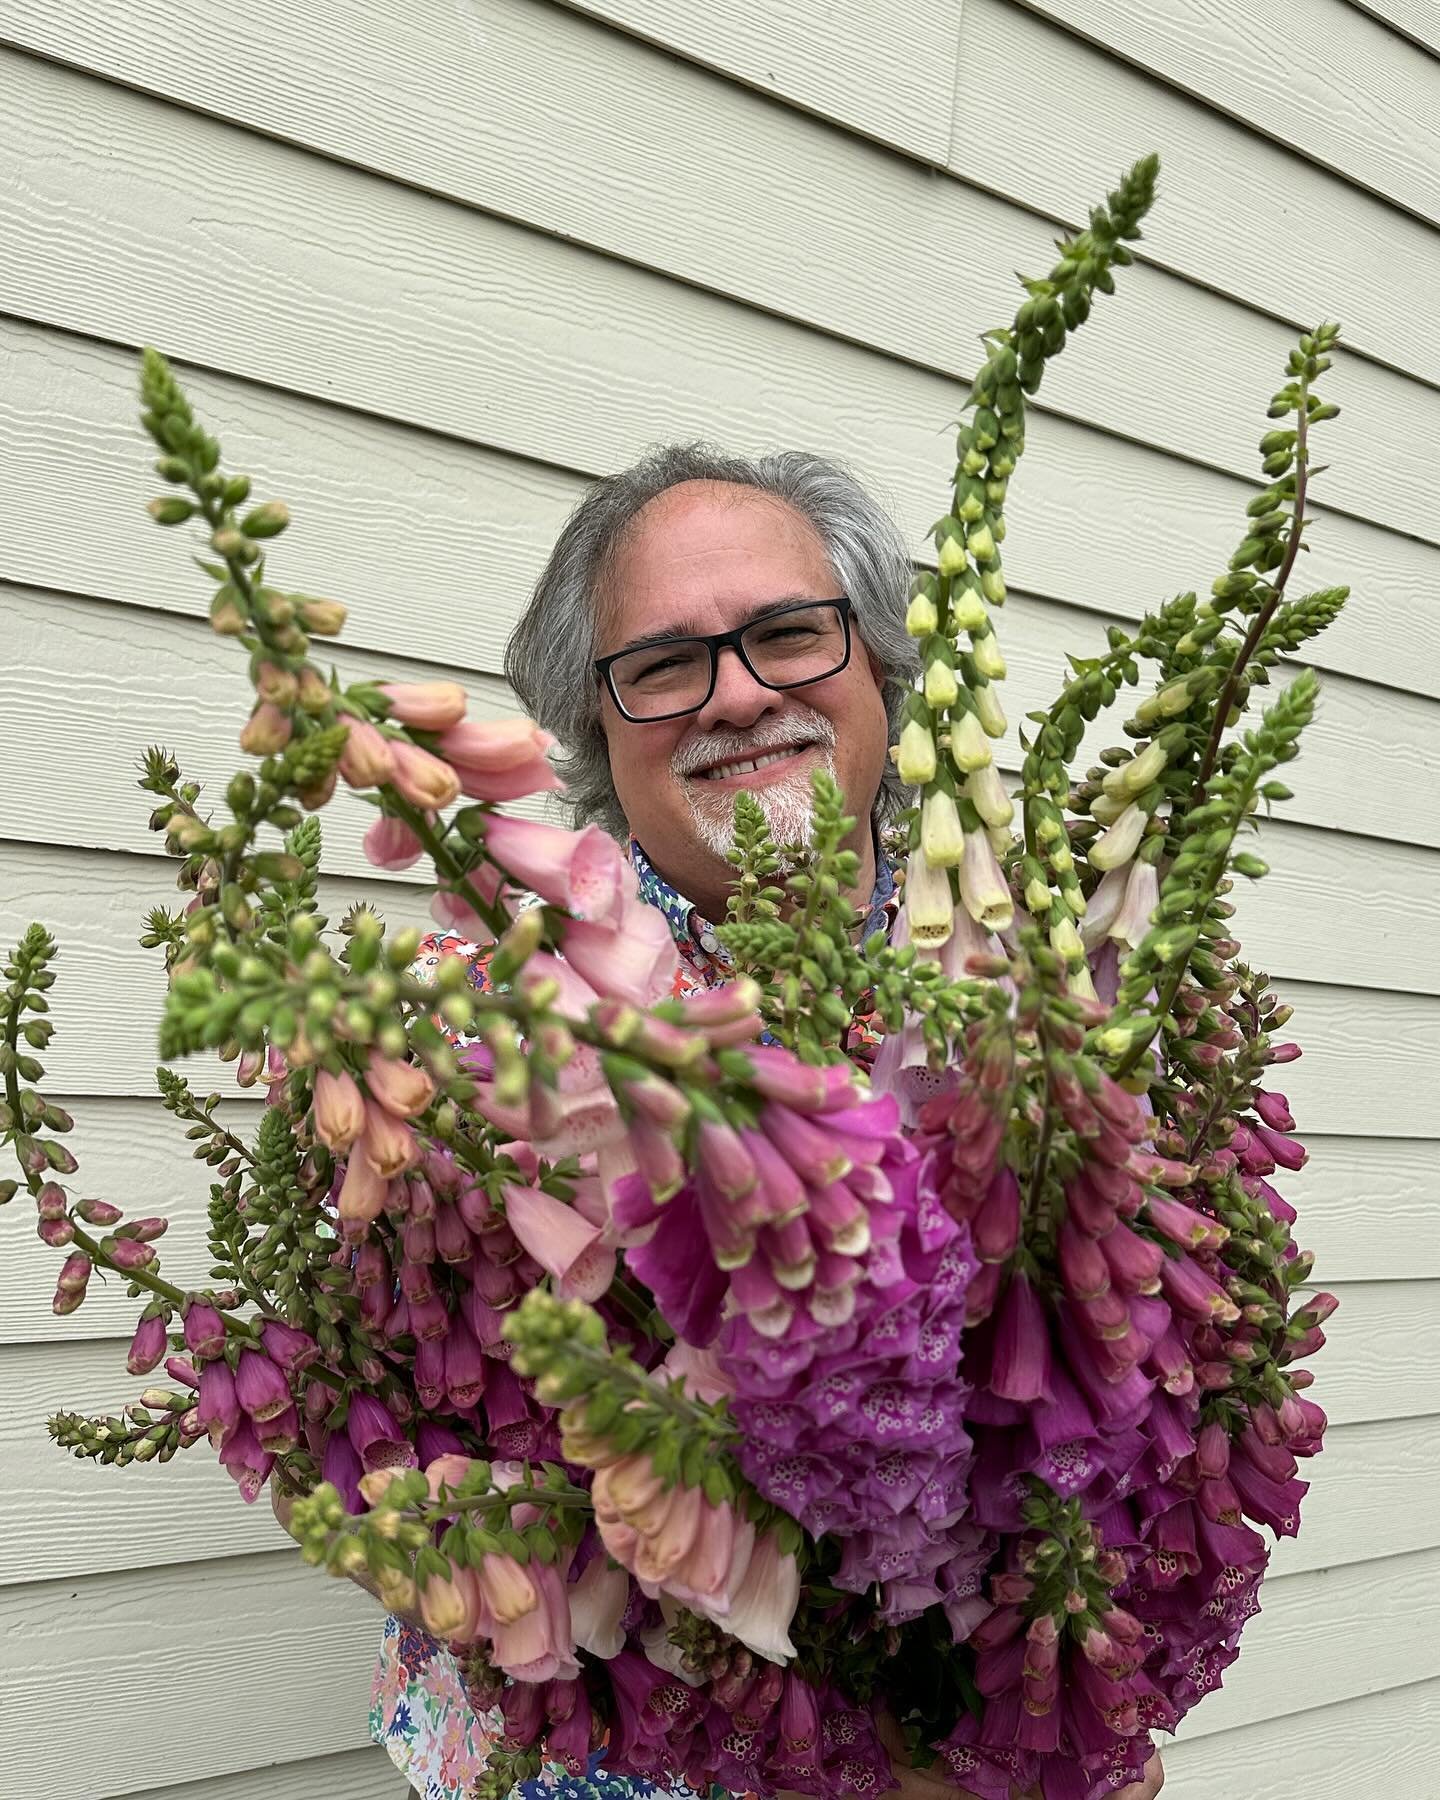 Did I mention I love foxglove???? Especially after this past week&rsquo;s episode with @littlestateflowerco !! Anna Jane shared so much great information!! Listen wherever you listen to podcasts!!

Thank you @southernflorafarms for your beautiful flo